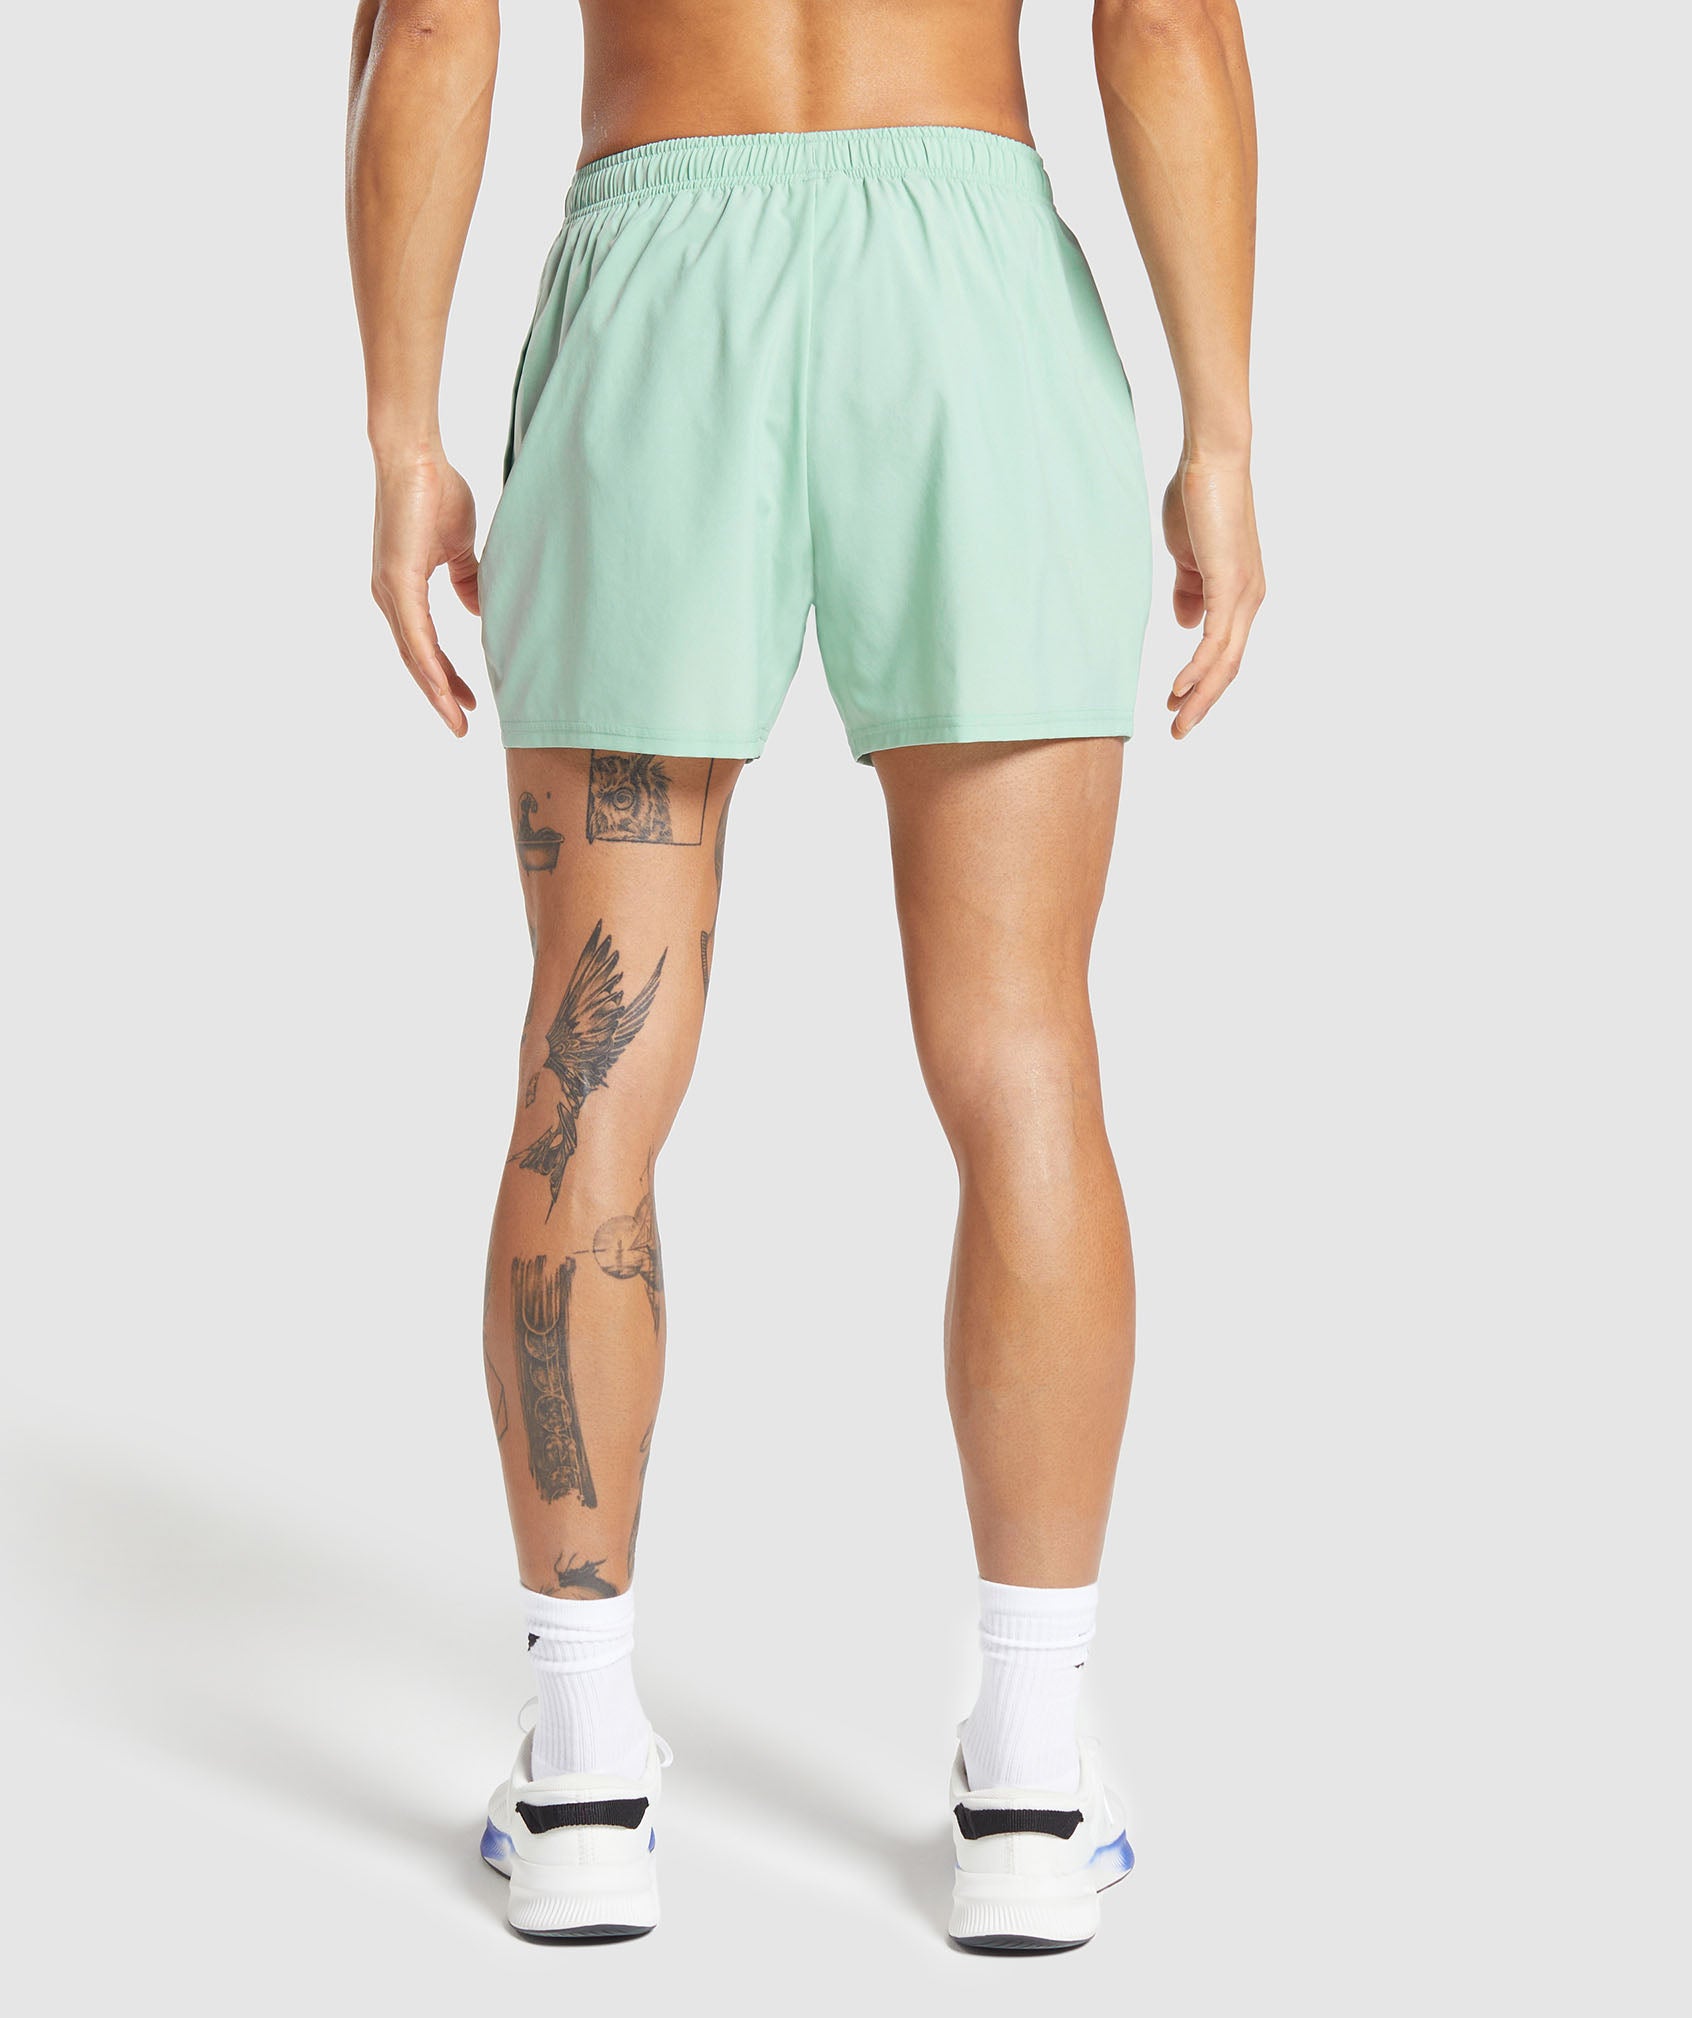 Arrival 5" Shorts in Lido Green - view 2